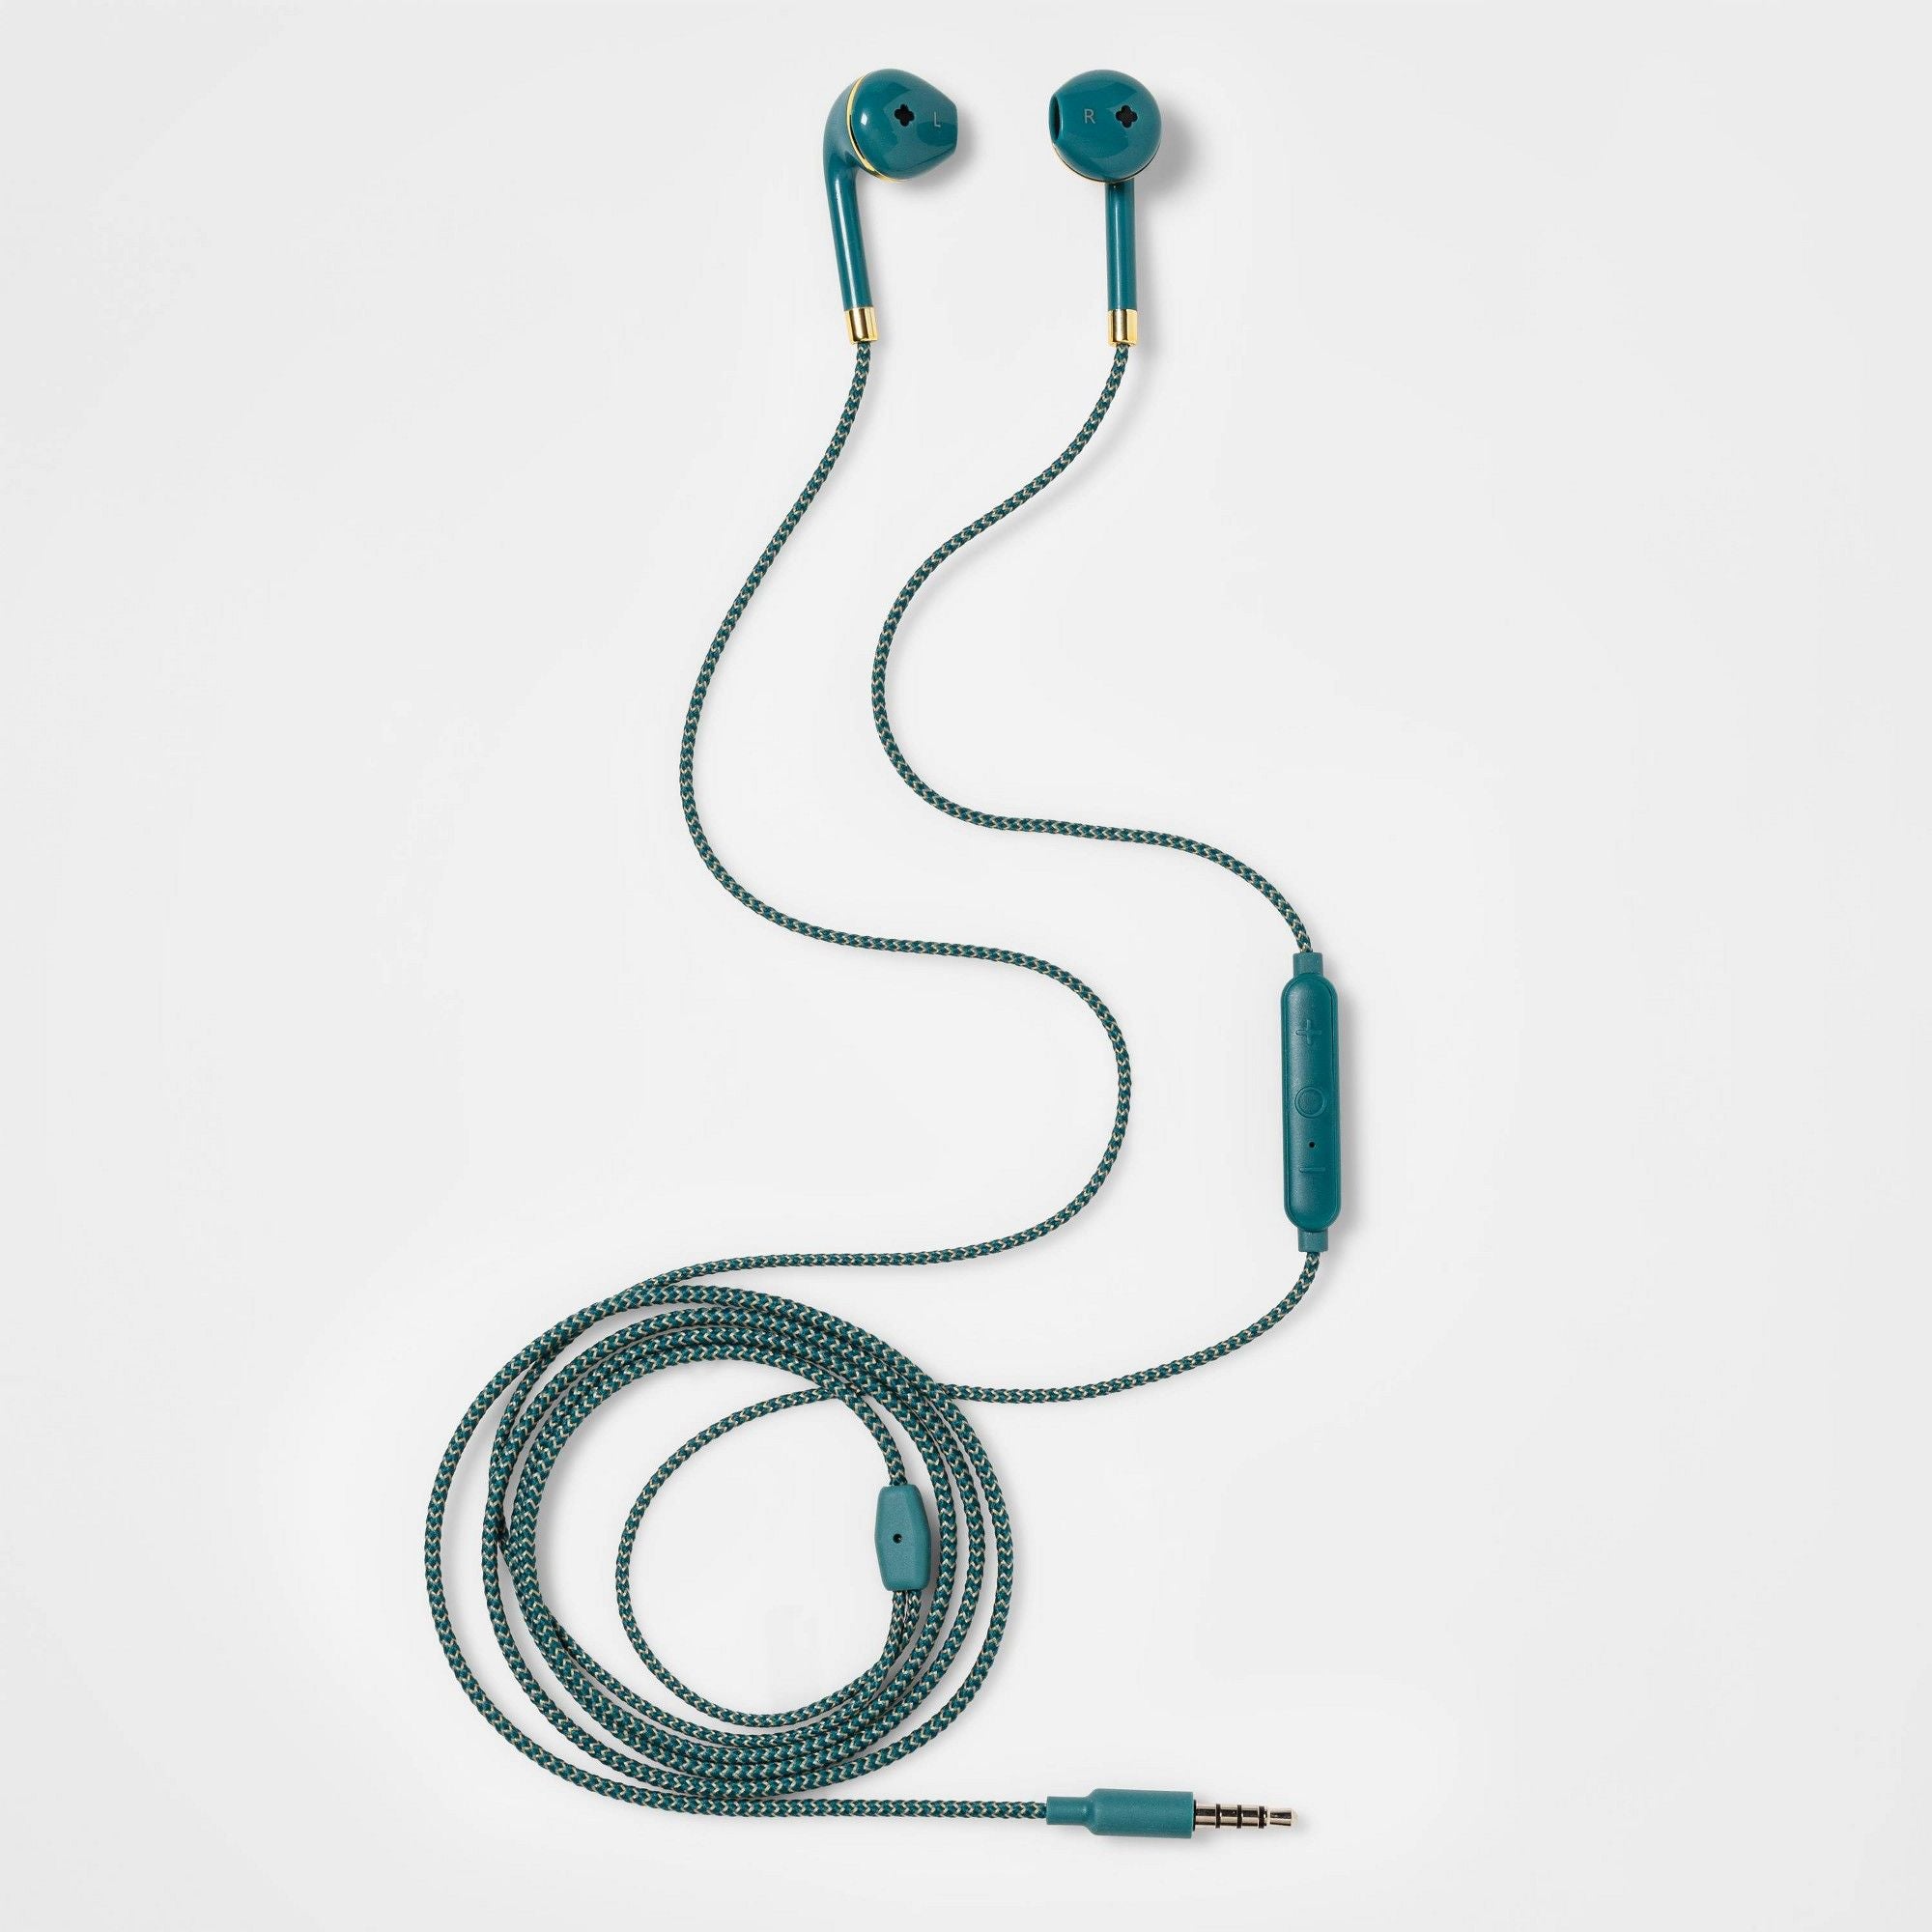 Heyday Wired Earbuds - Teal